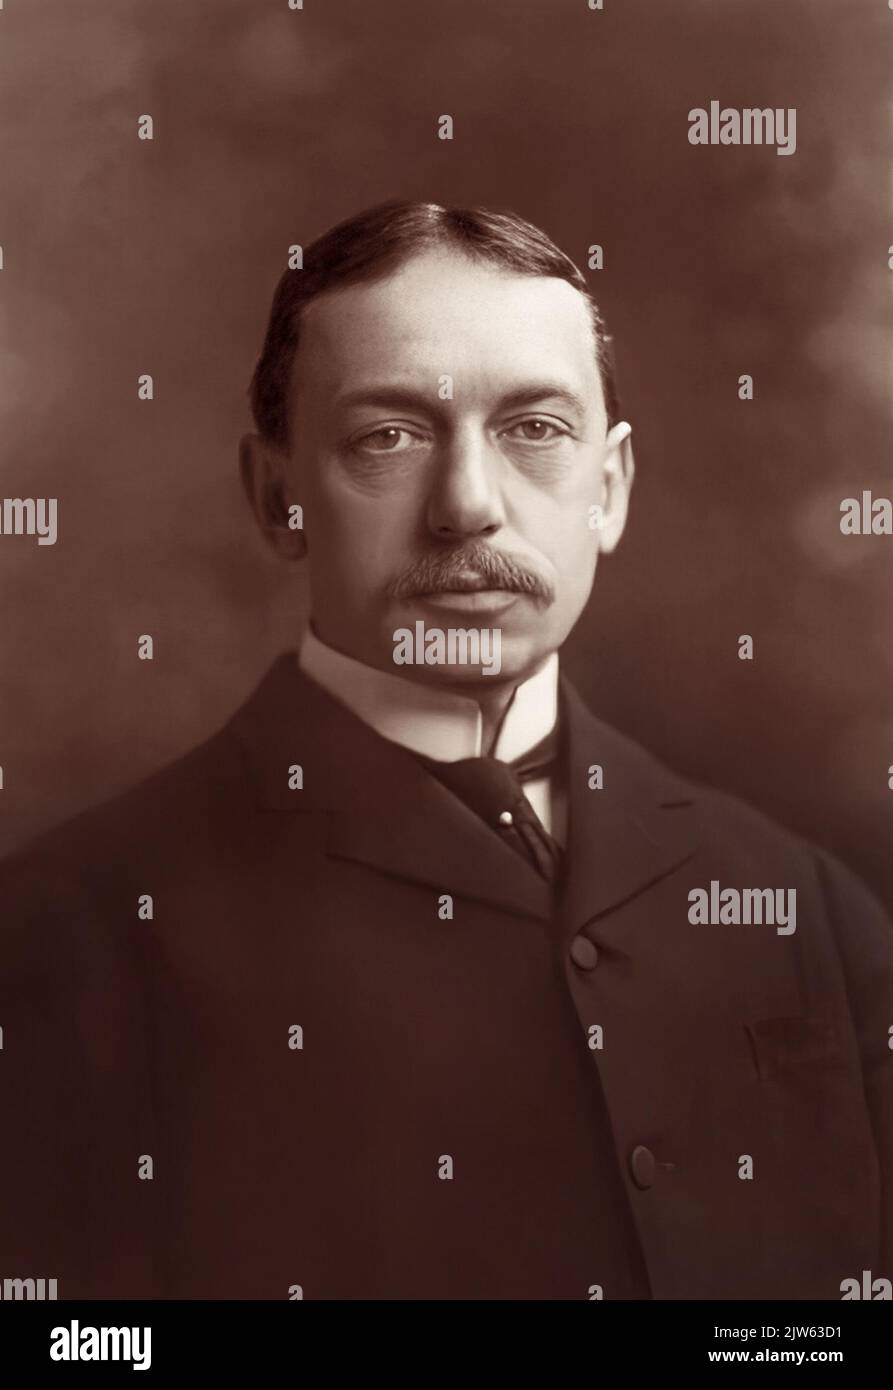 Henry Fairfield Osborn (1857-1935), American paleontologist, geologist and eugenics advocate. Osborn was the president of the American Museum of Natural History for 25 years and was a cofounder of the American Eugenics Society. Stock Photo